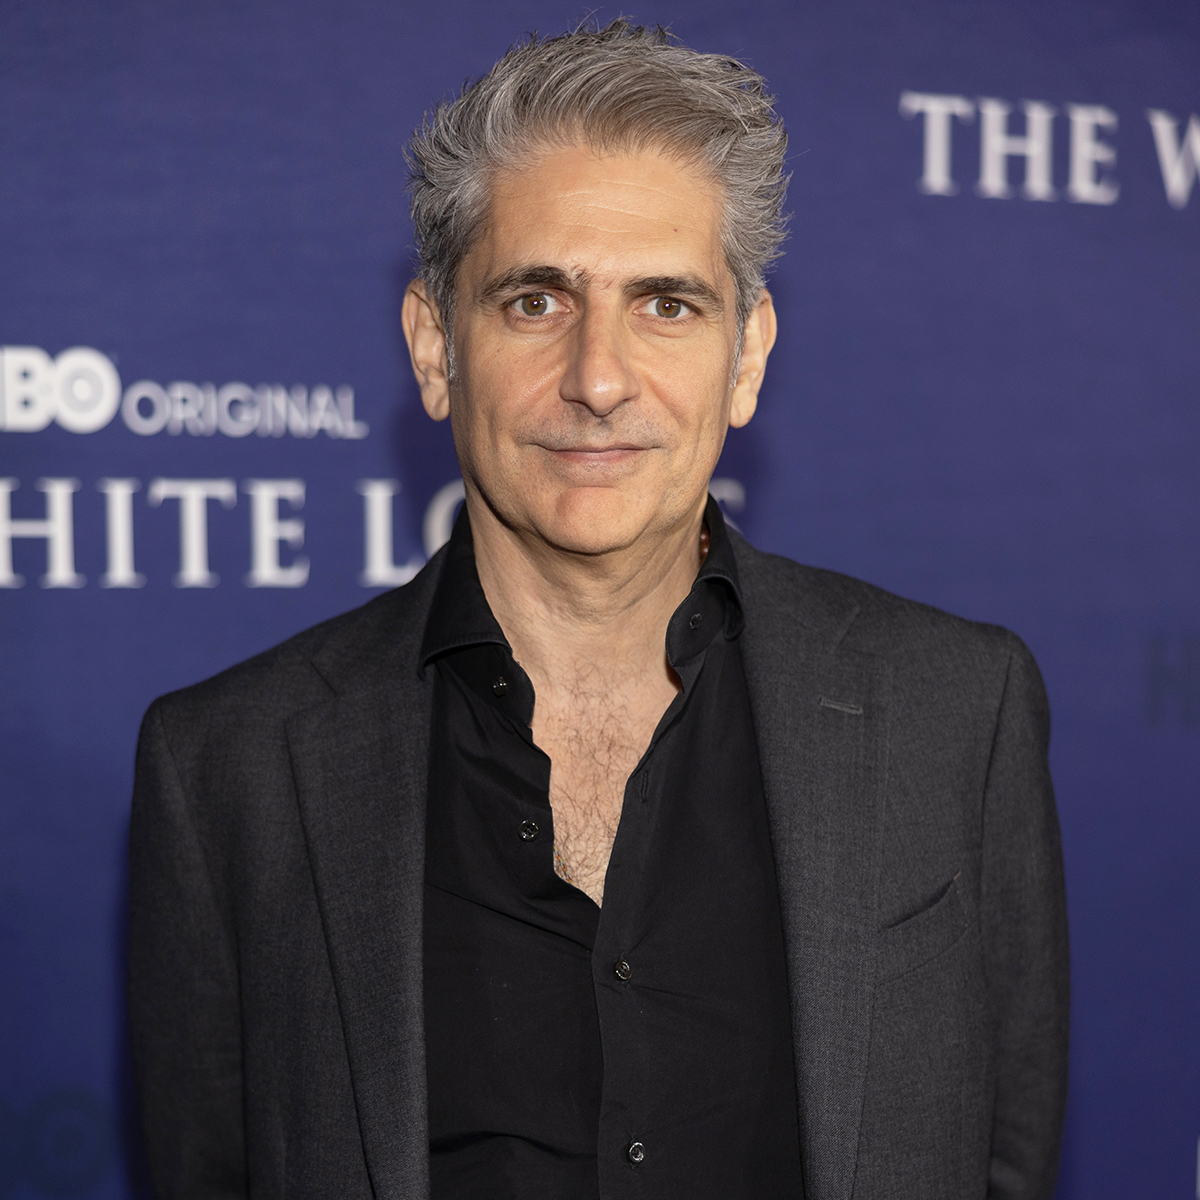 The White Lotus' Michael Imperioli Gives Tour of His NYC Home